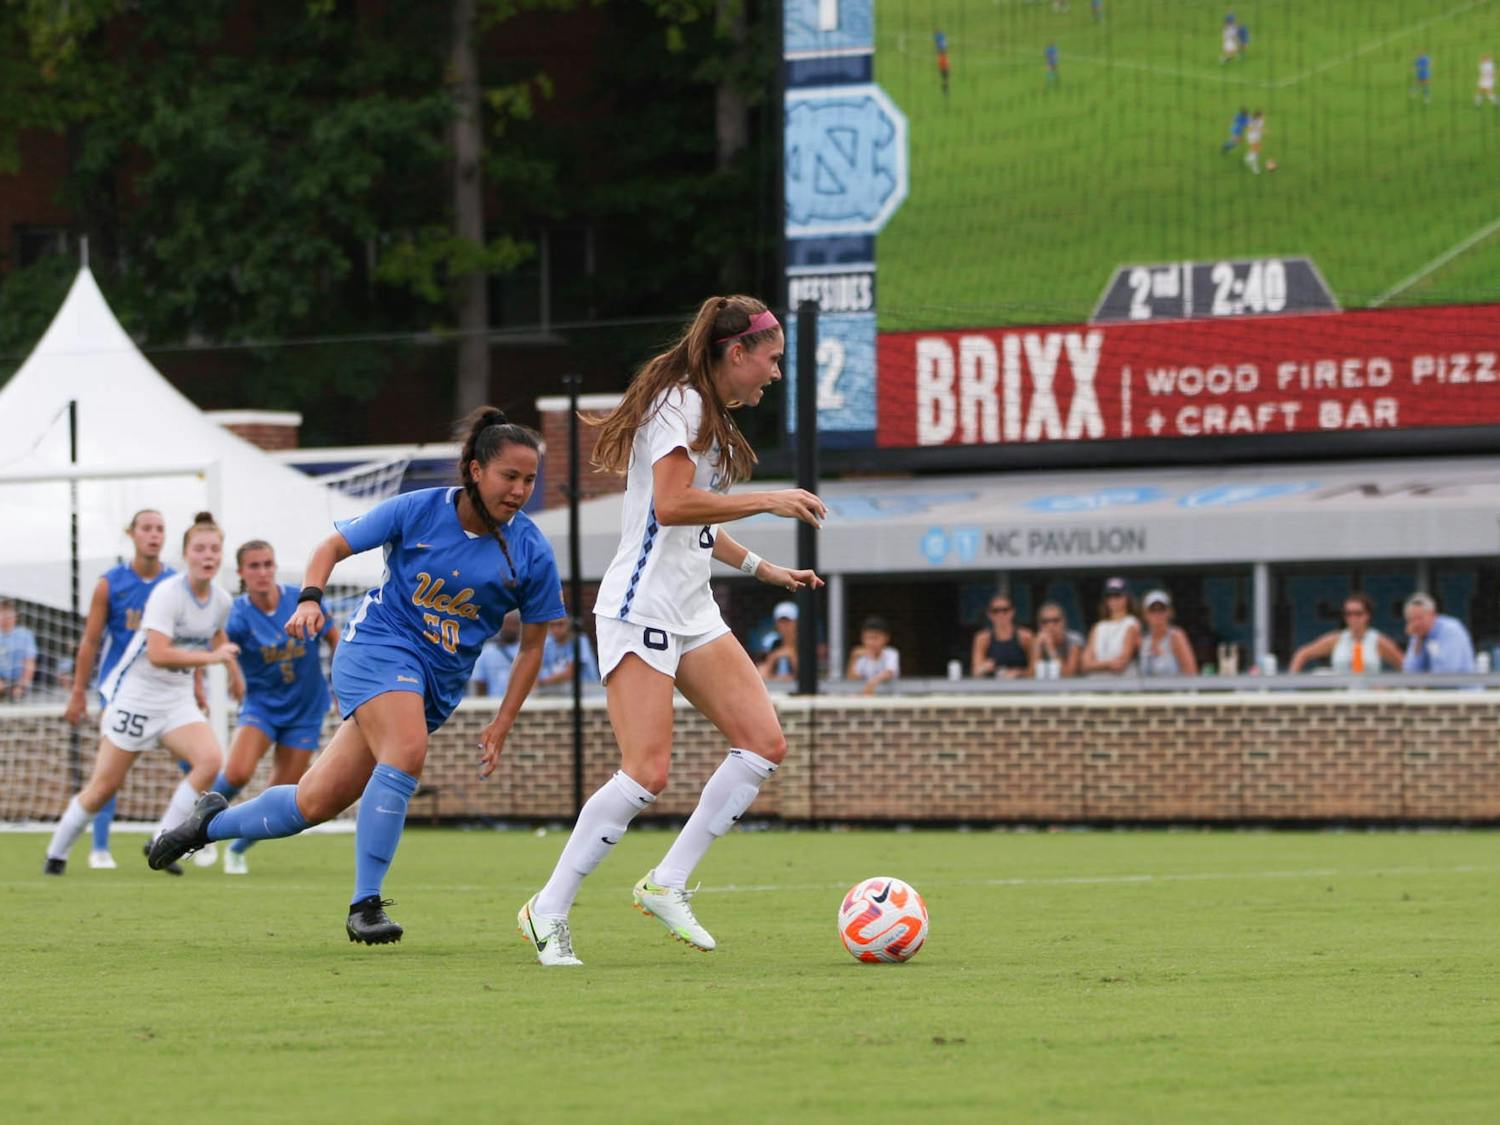 Senior forward Emily Moxley (8) defends the ball in the game versus UCLA at Dorrance Field on Sept. 4, 2022. UNC falls to UCLA with a score of 2-1.